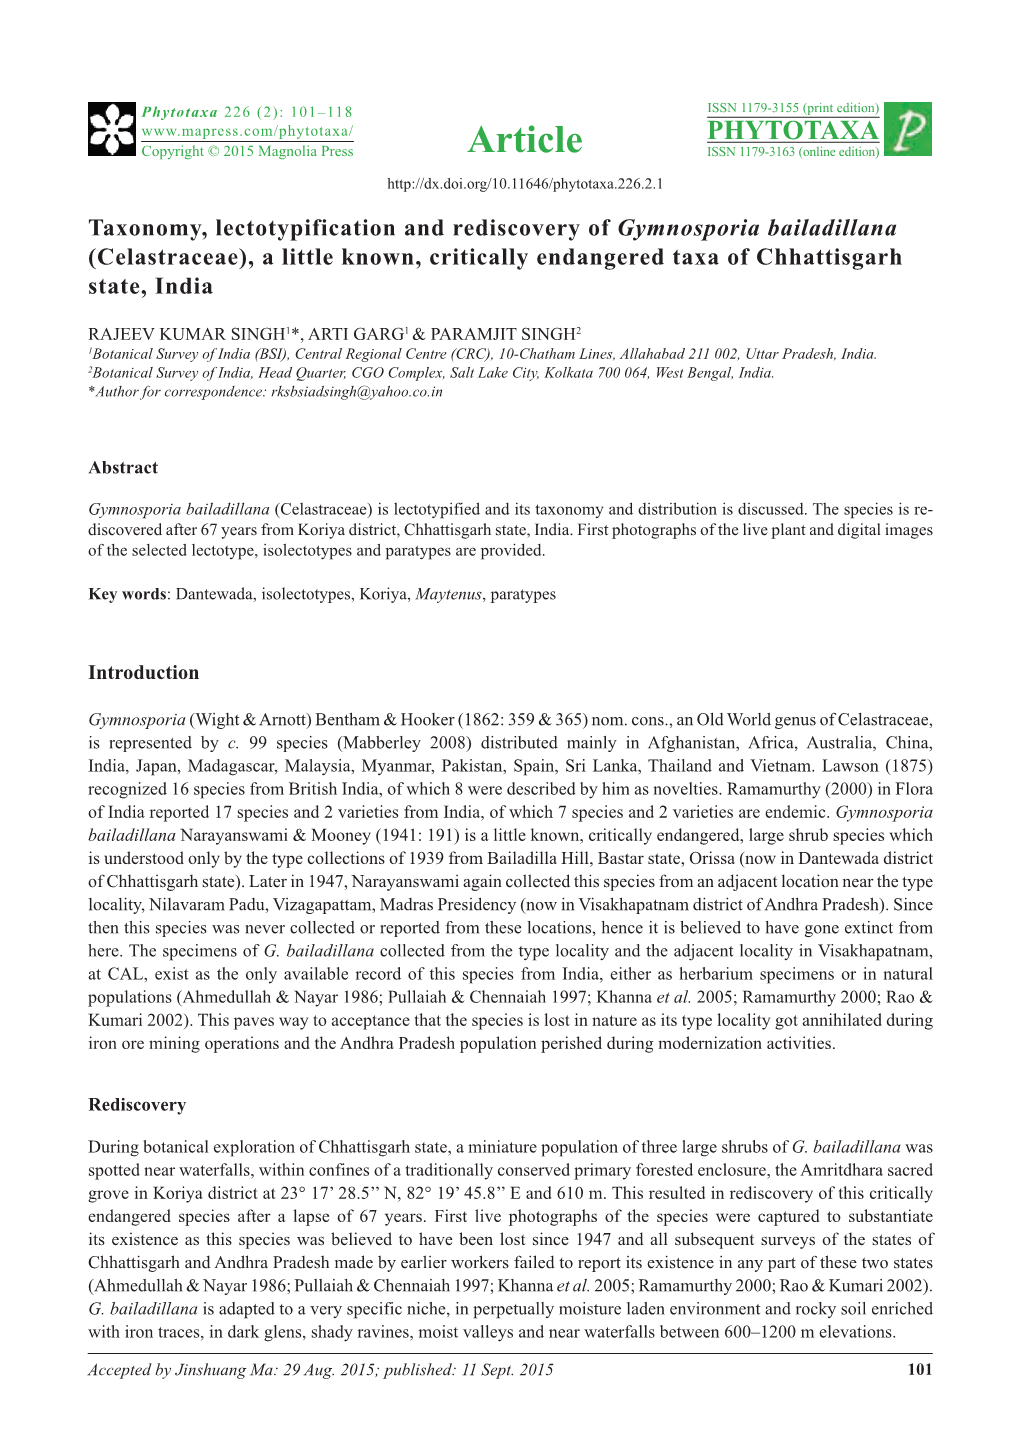 Taxonomy, Lectotypification and Rediscovery of Gymnosporia Bailadillana (Celastraceae), a Little Known, Critically Endangered Taxa of Chhattisgarh State, India